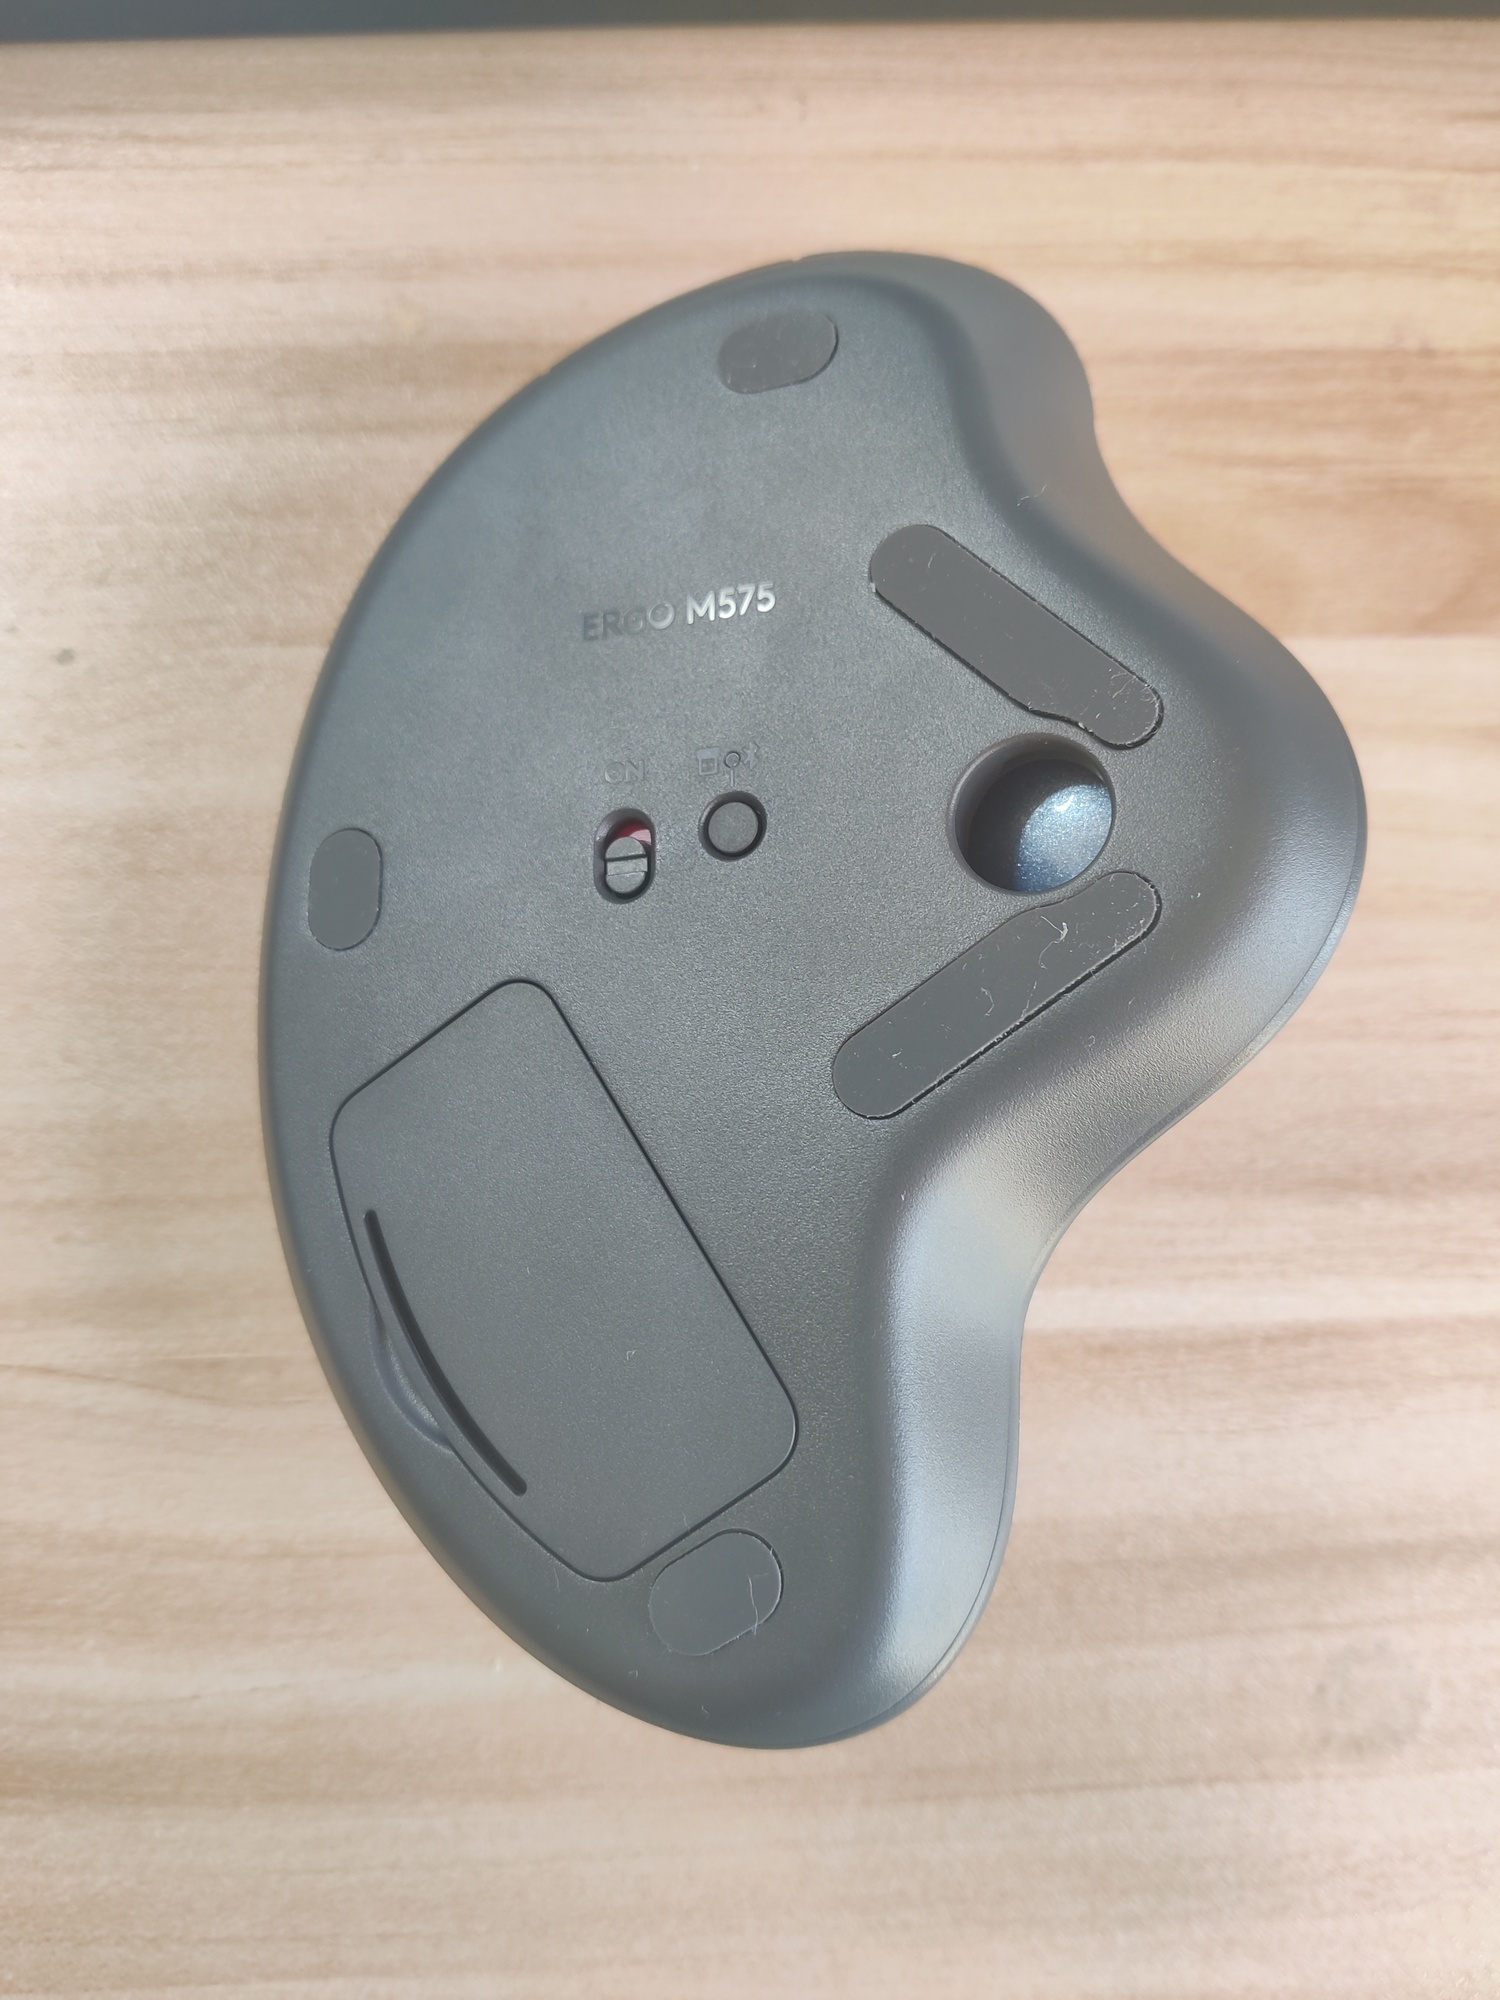 Bottom view. A mostly flat surface except for an engraved "ERGO M575",
a few rubber pads, an on/off toggle switch, a dongle/bluetooth switch
button, a hole exposing bottom of trackball, and the lid of the battery
holder.